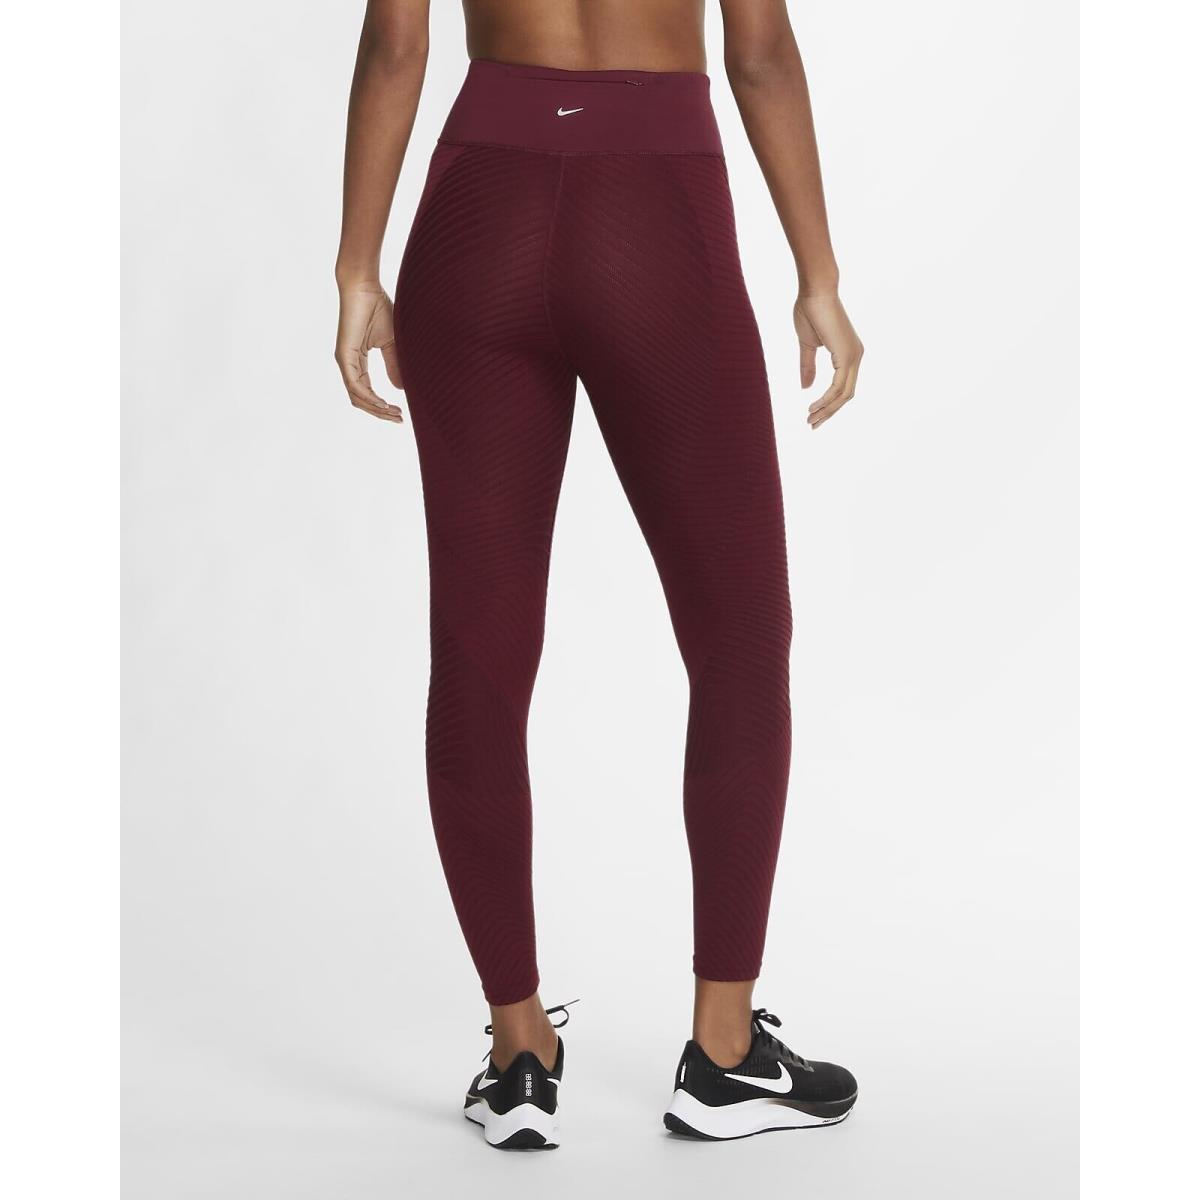 Women`s Mid-rise Textured Running Leggings Nike Epic Luxe CU3379-638 Size XS